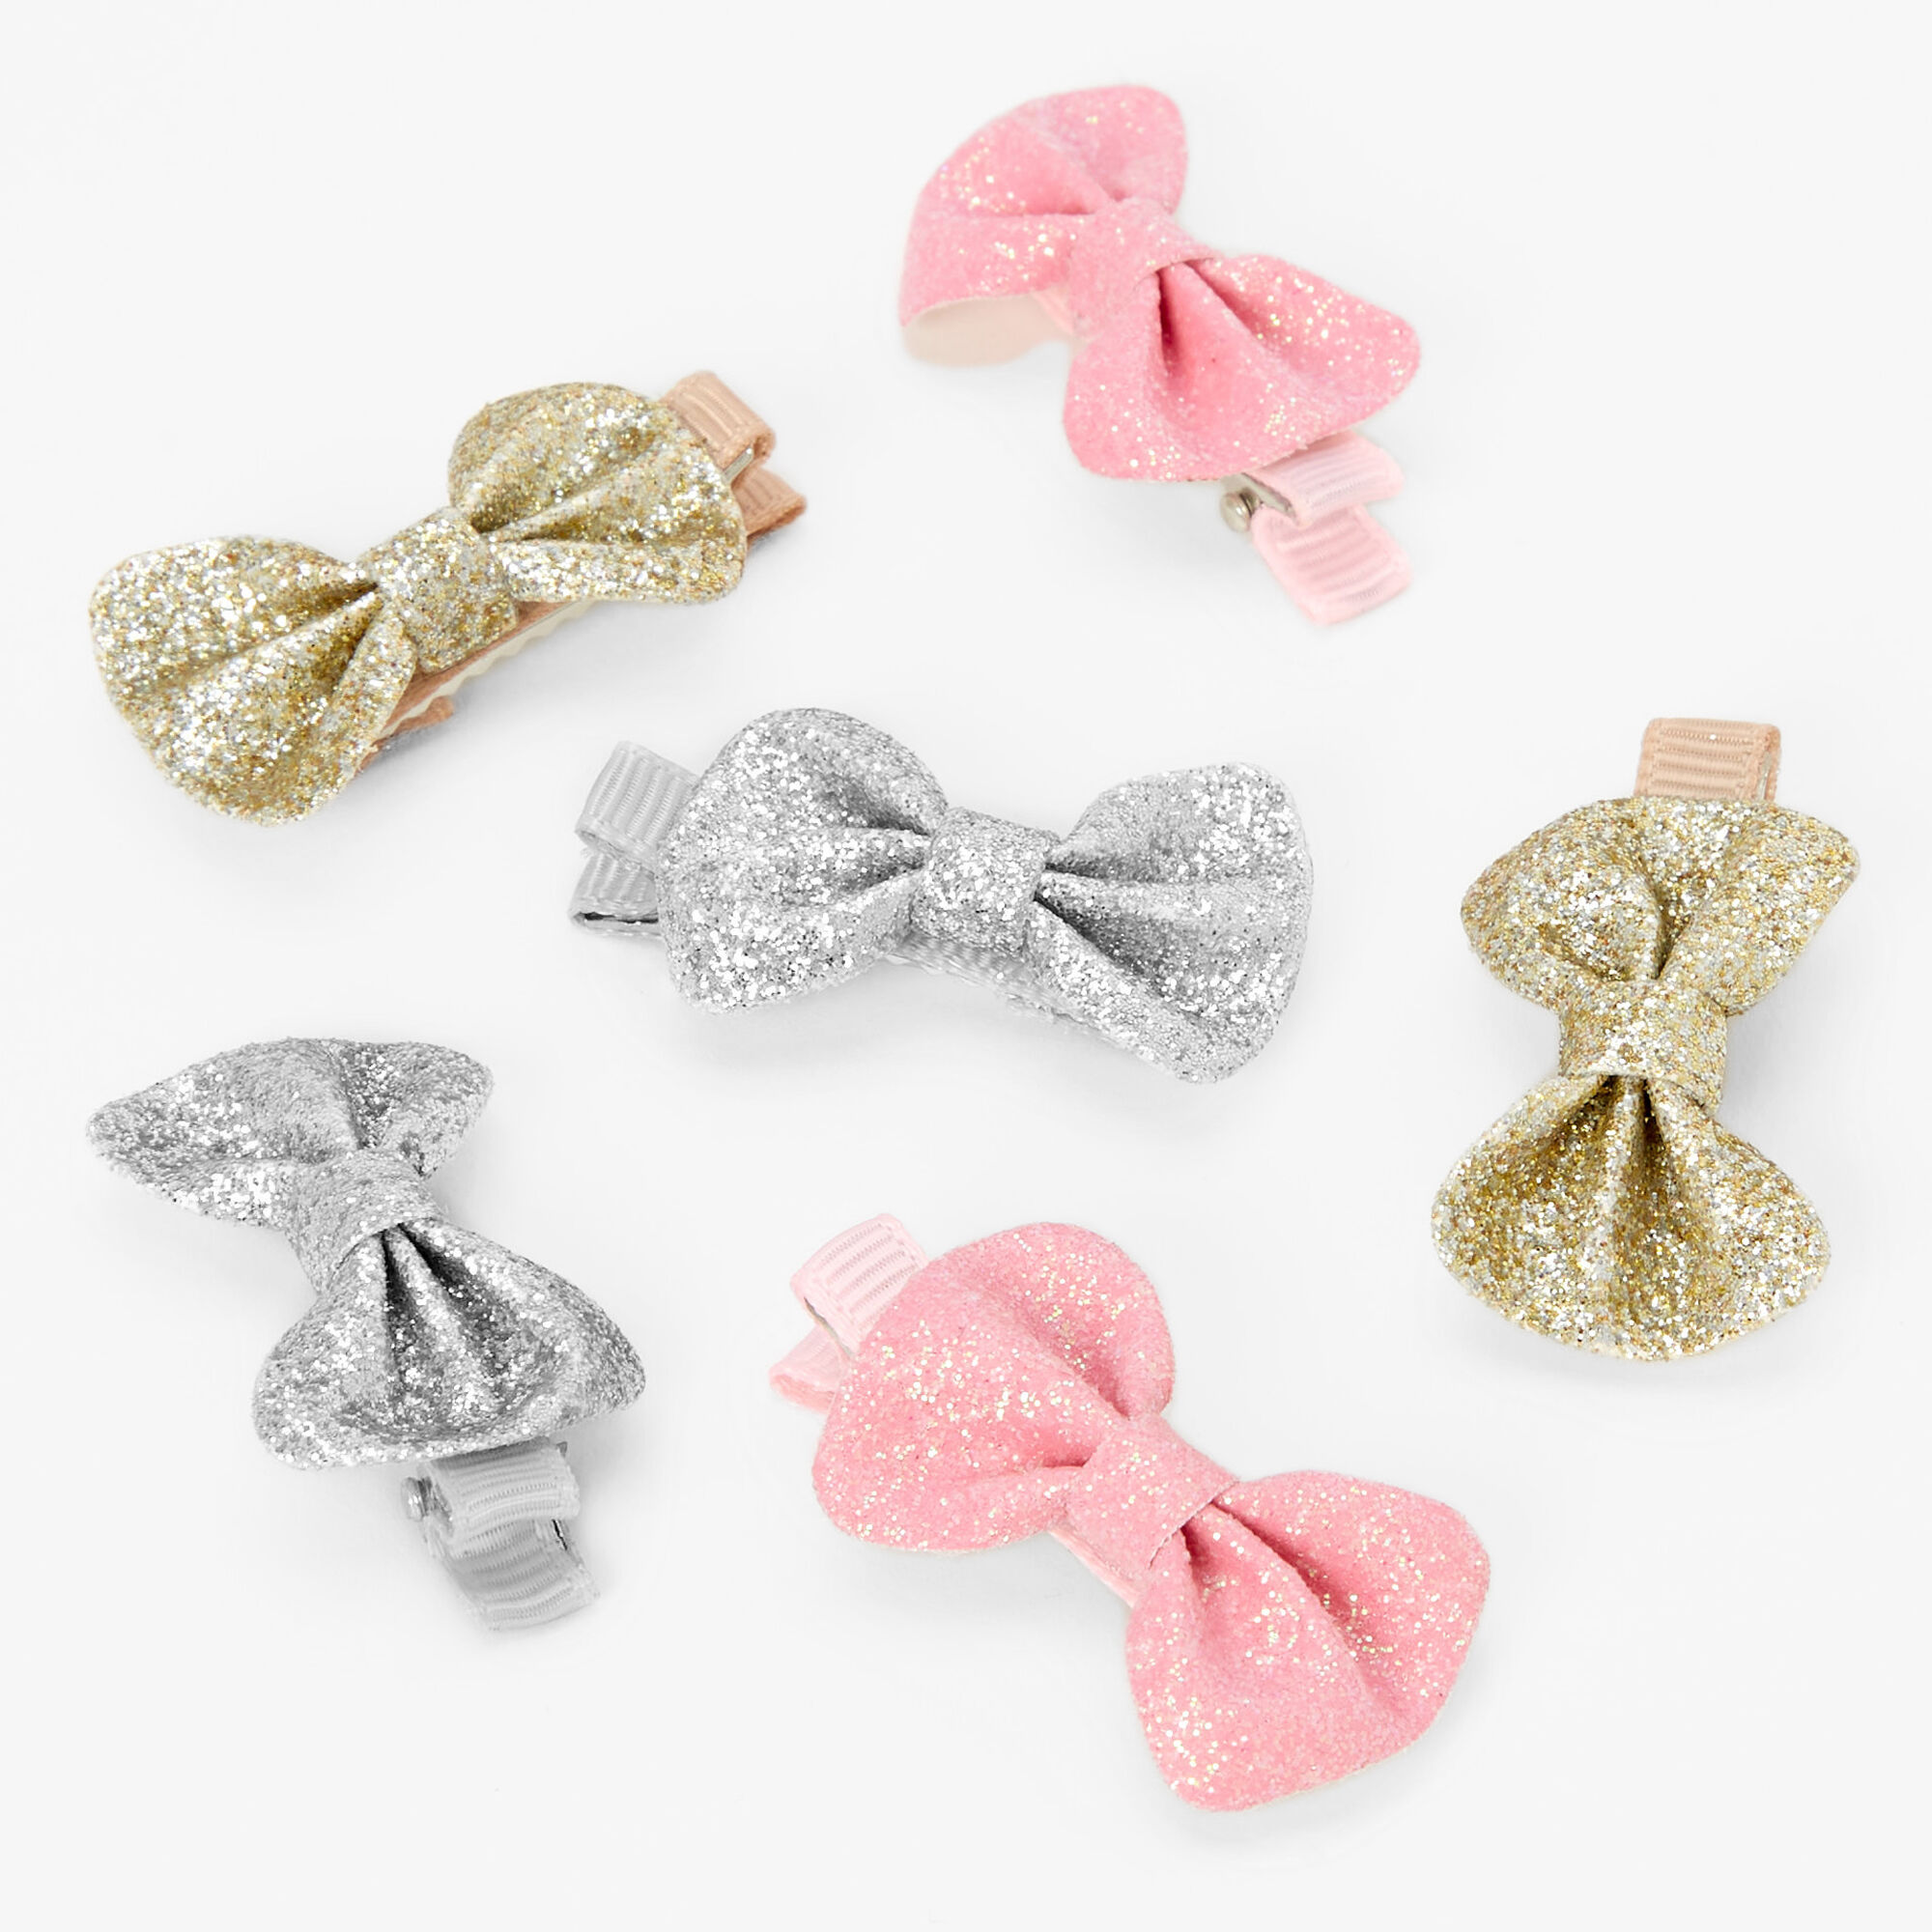  Claire's Club Glitter Bow Hair Clips for Girls Age 3-6,  Toddler Children's Little Girl Hair Accessories Crocodile Clip Barrettes  Pink Gold and White Hair Bows (3 Pack) : Beauty & Personal Care